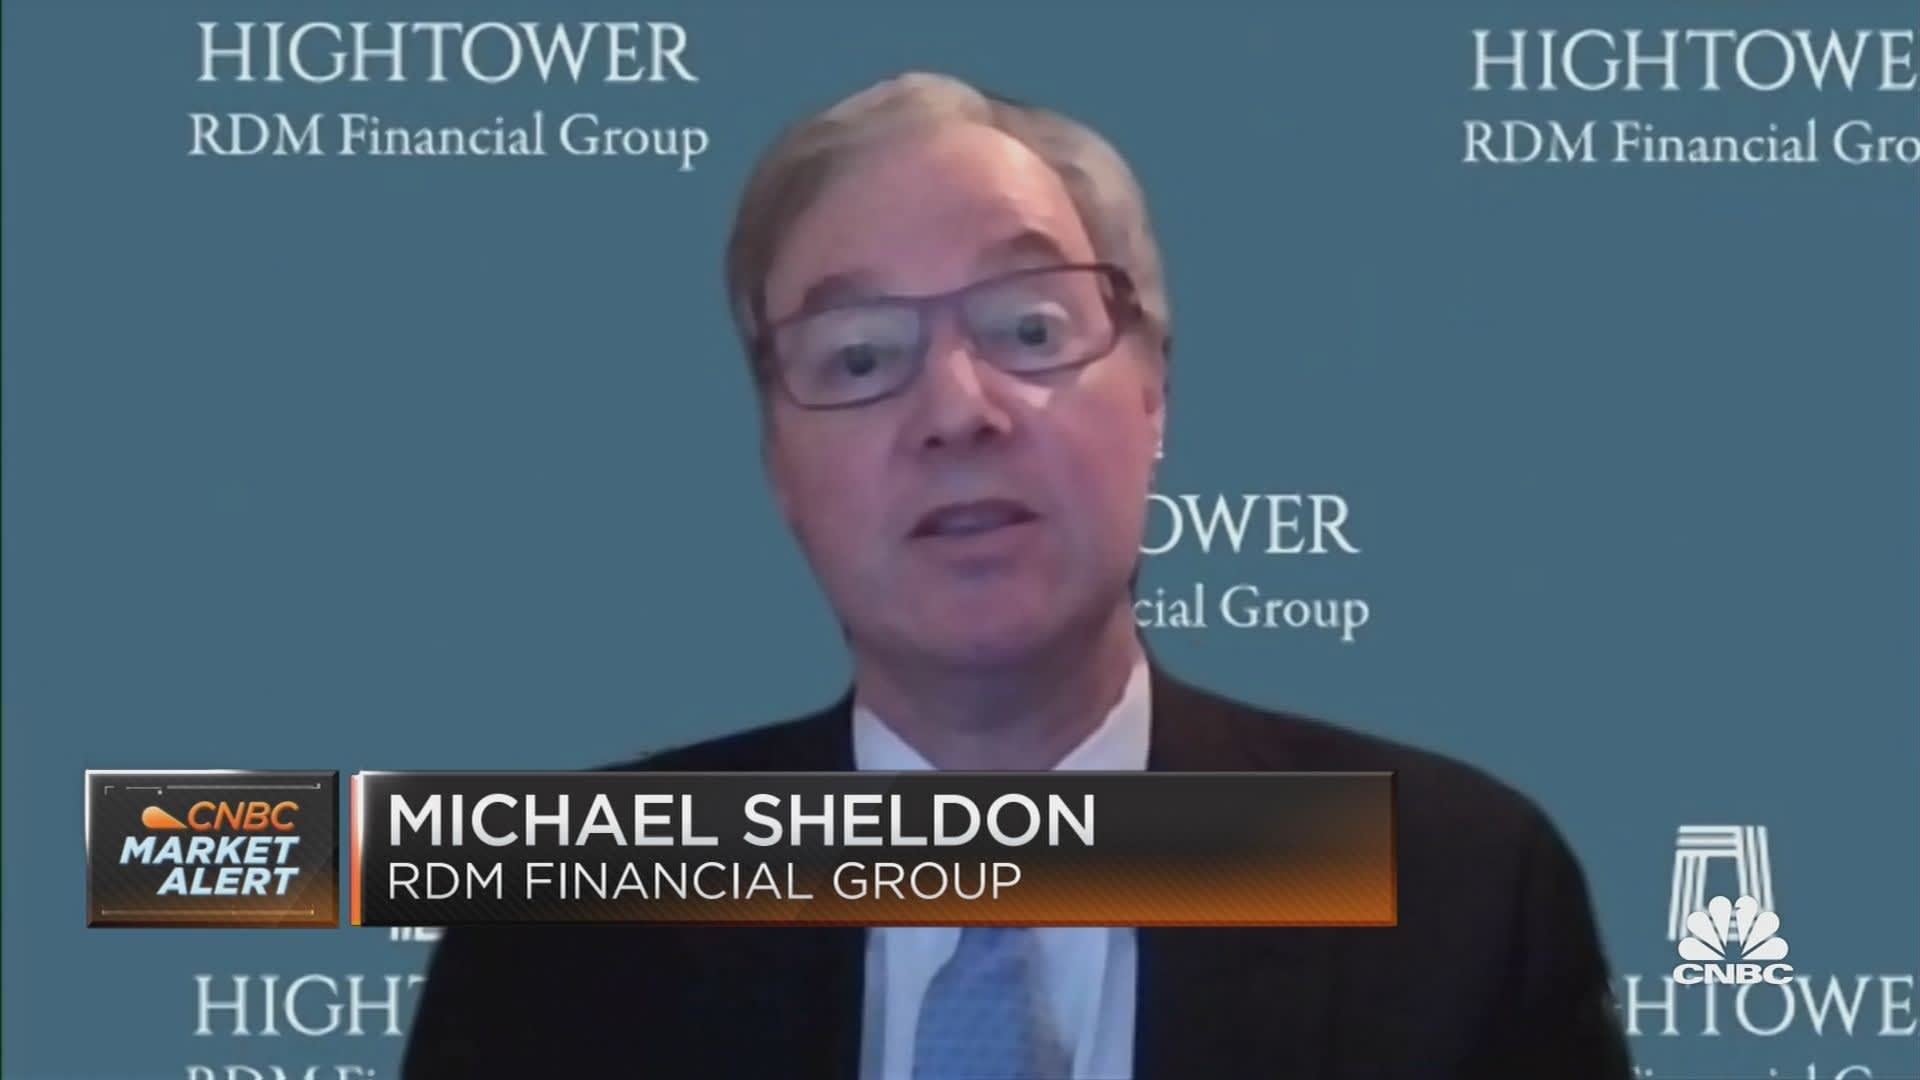 Sheldon: There are some concerns out there, but investors seem to be trained to buy the dips